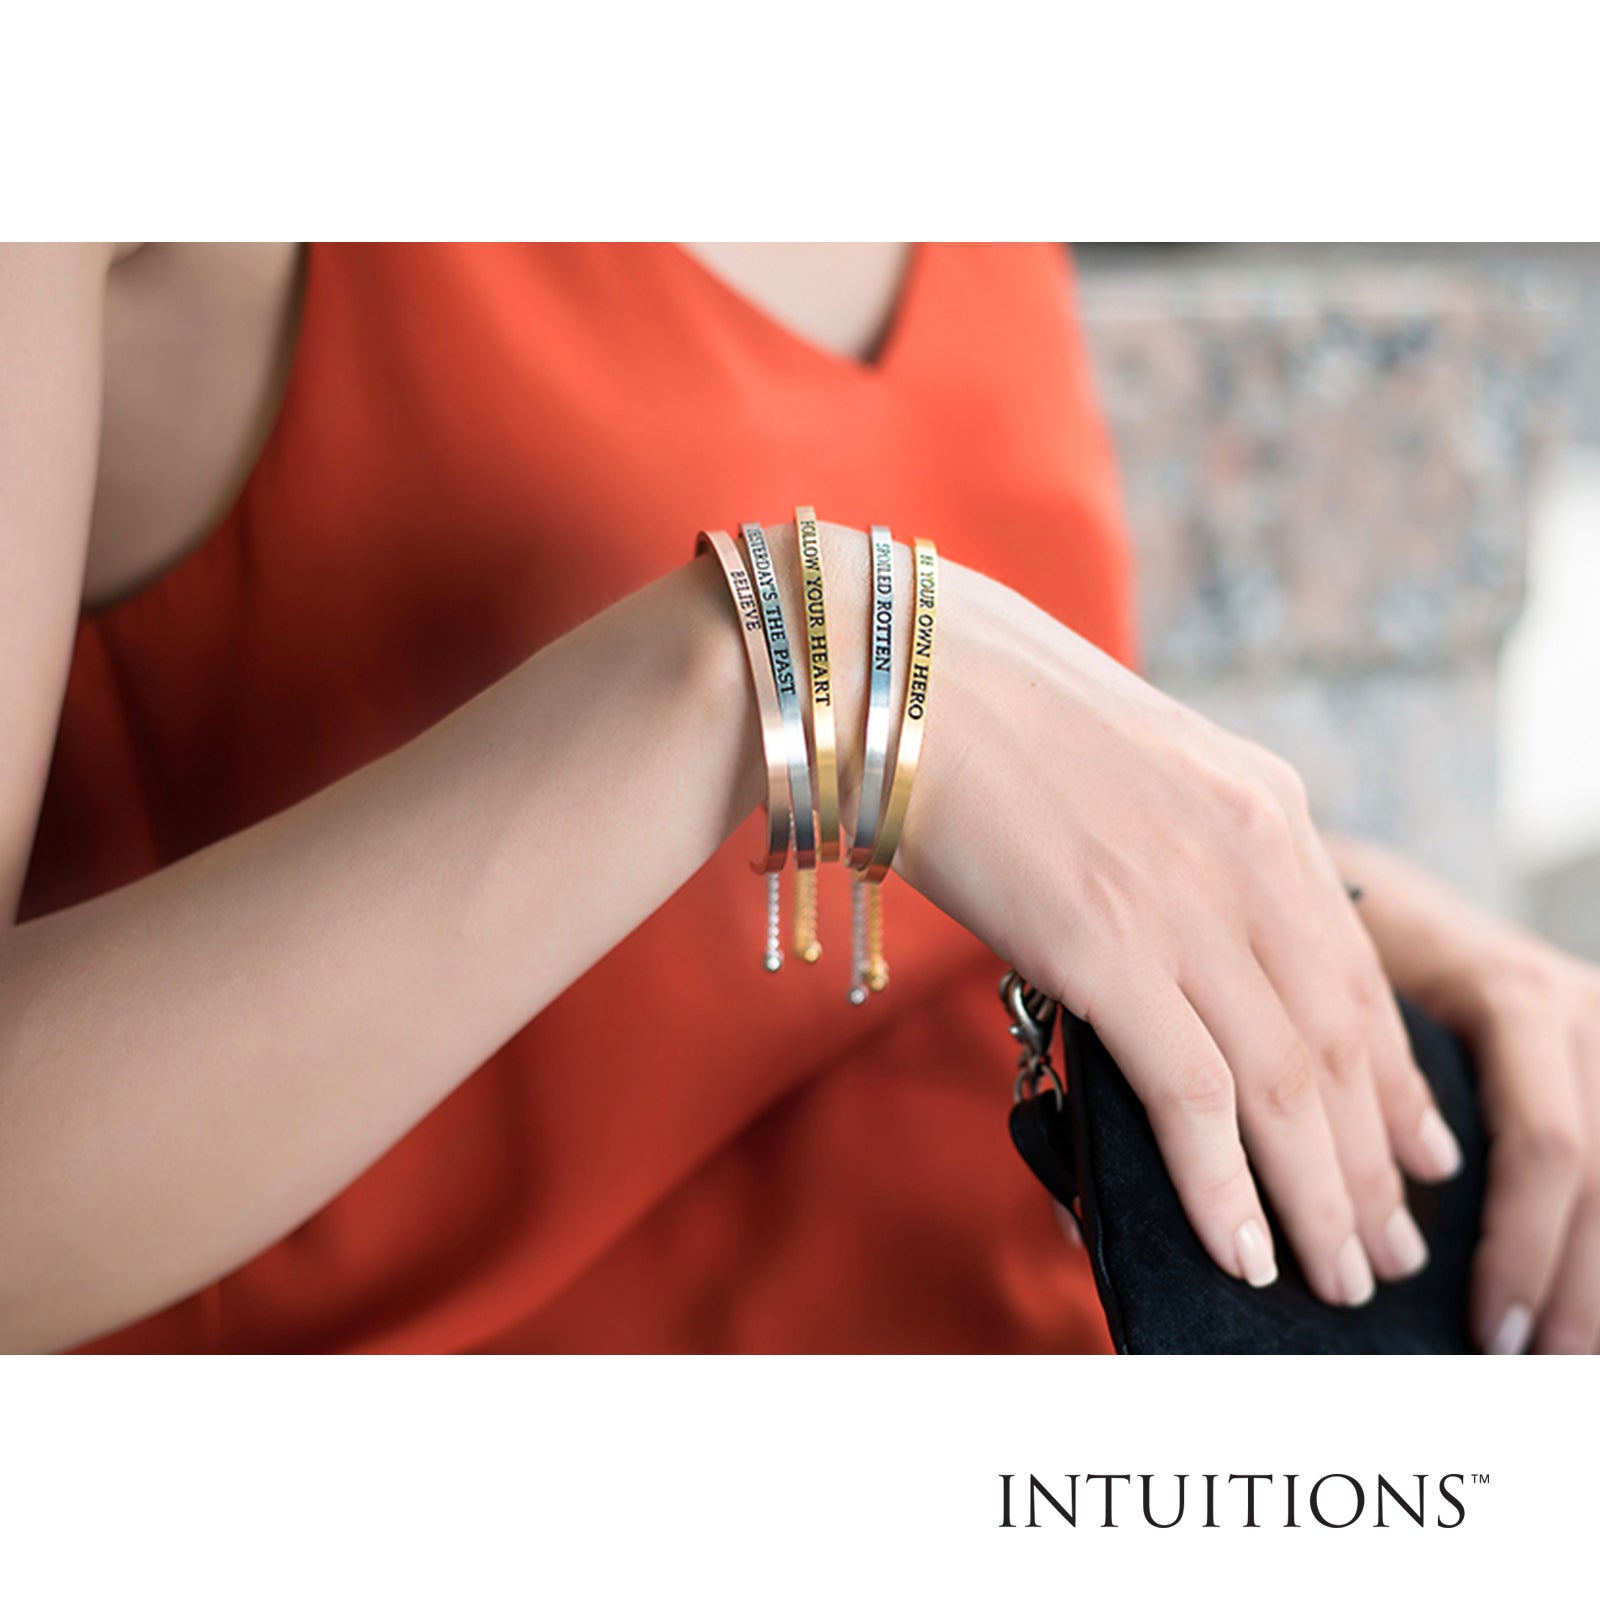 Intuitions Stainless Steel LOVE YOURSELF Diamond Accent Cuff Bangle Bracelet